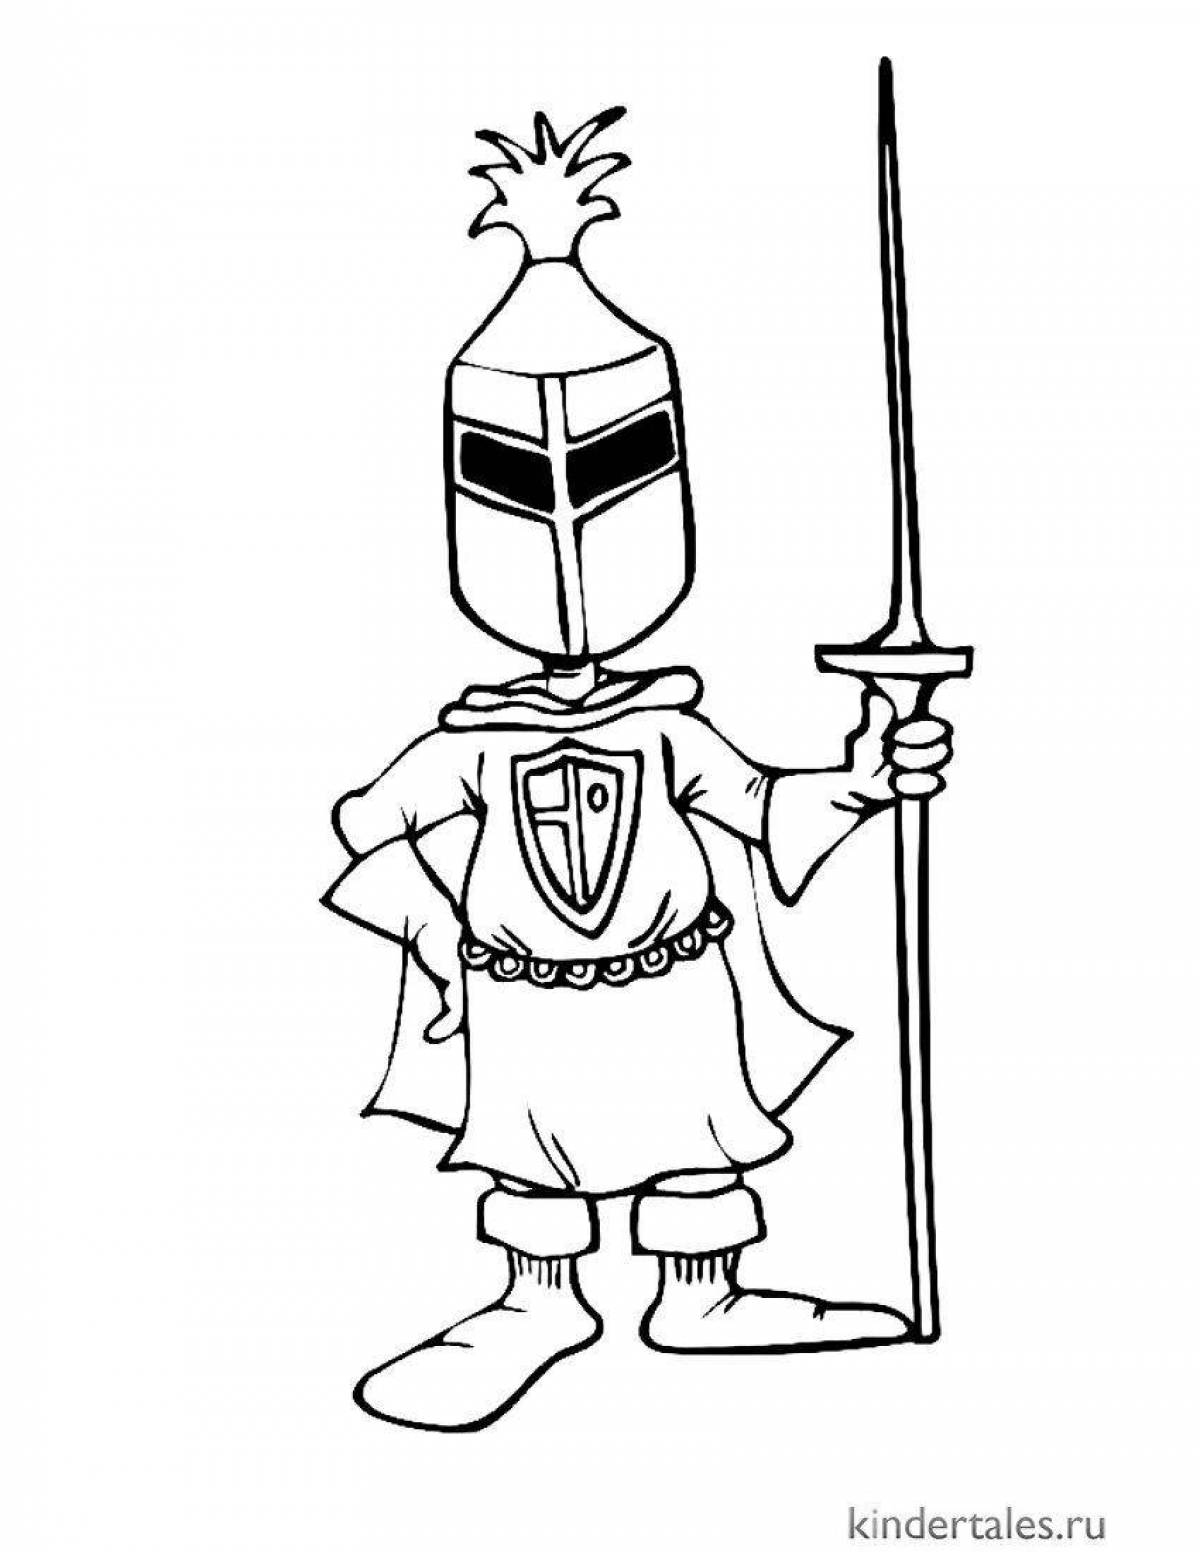 Famous knight coloring book for kids